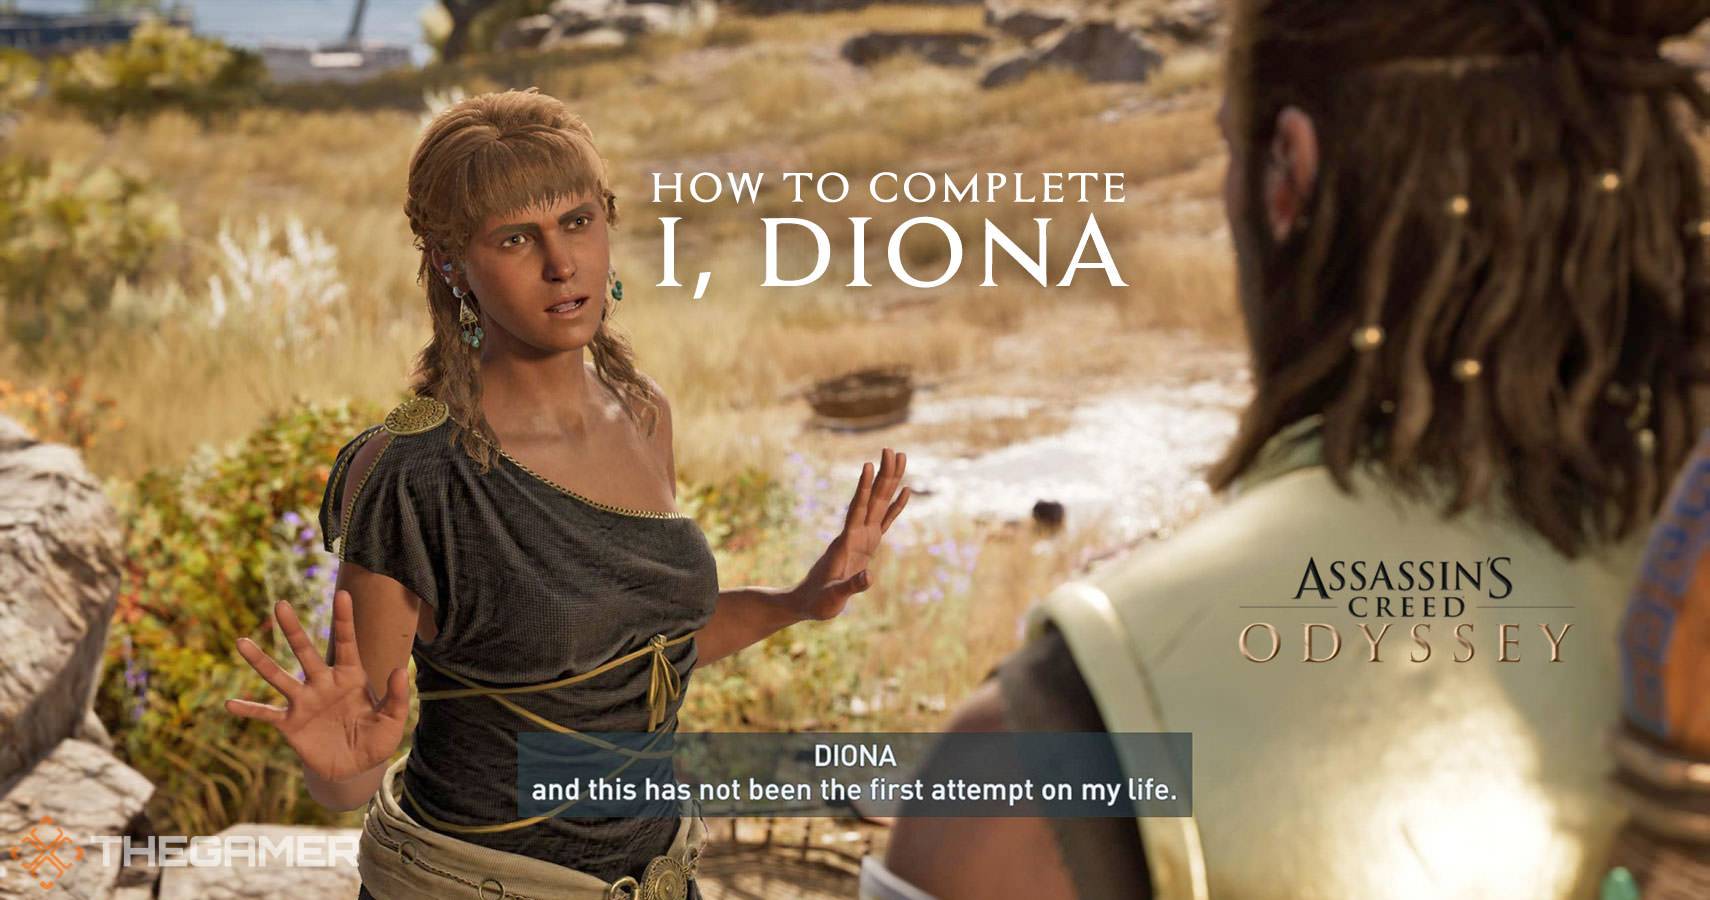 Ac odyssey which one is diona